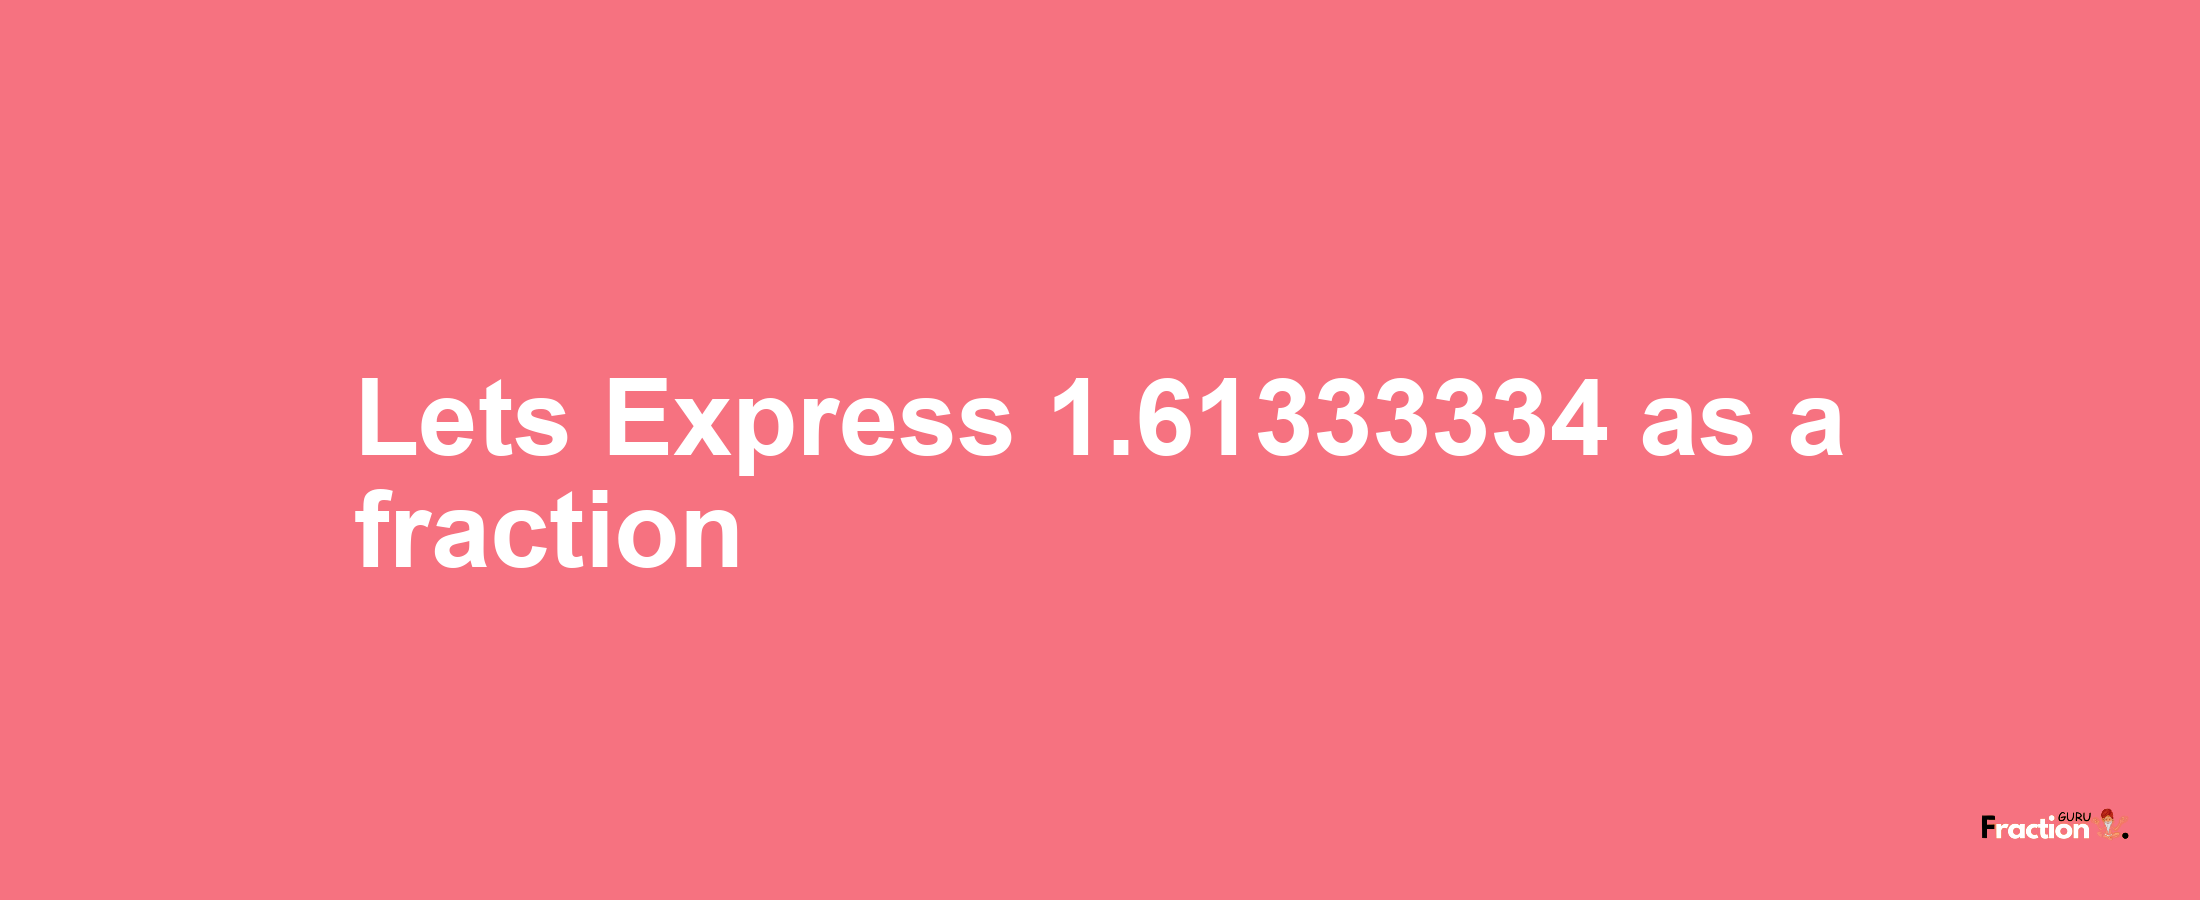 Lets Express 1.61333334 as afraction